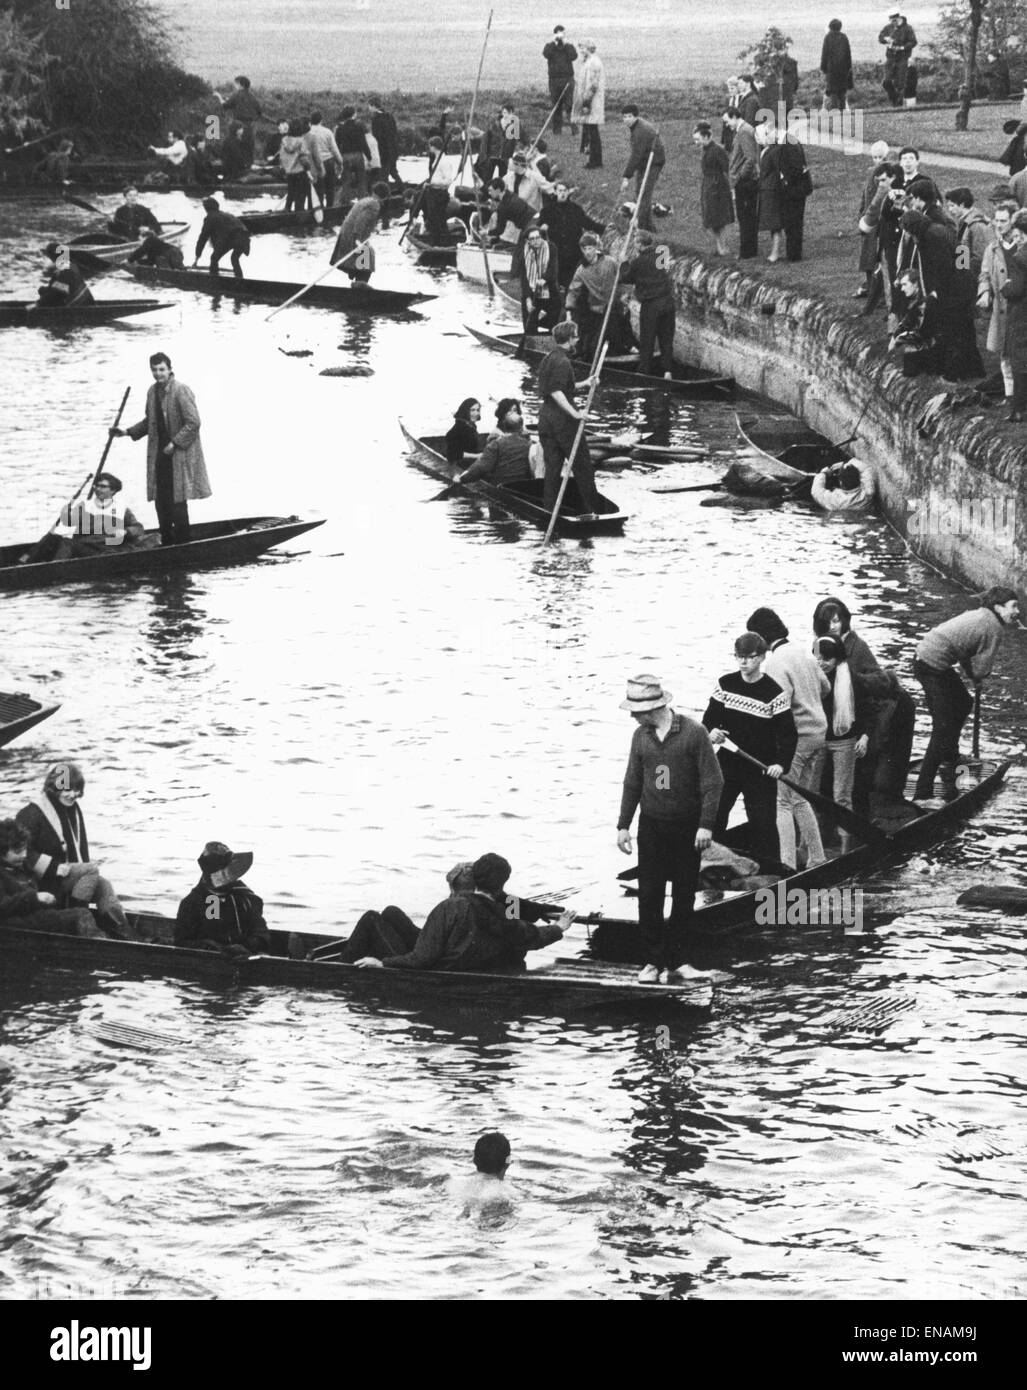 FILE PHOTOS: Oxford, Oxfordshire, UK. 1st May 1964. Oxford May morning 1964. May Day. Punting Chaos on the Cherwell River as some people swim while others try to get into boats from the water. Oxford Mail/Alamy Features . Stock Photo